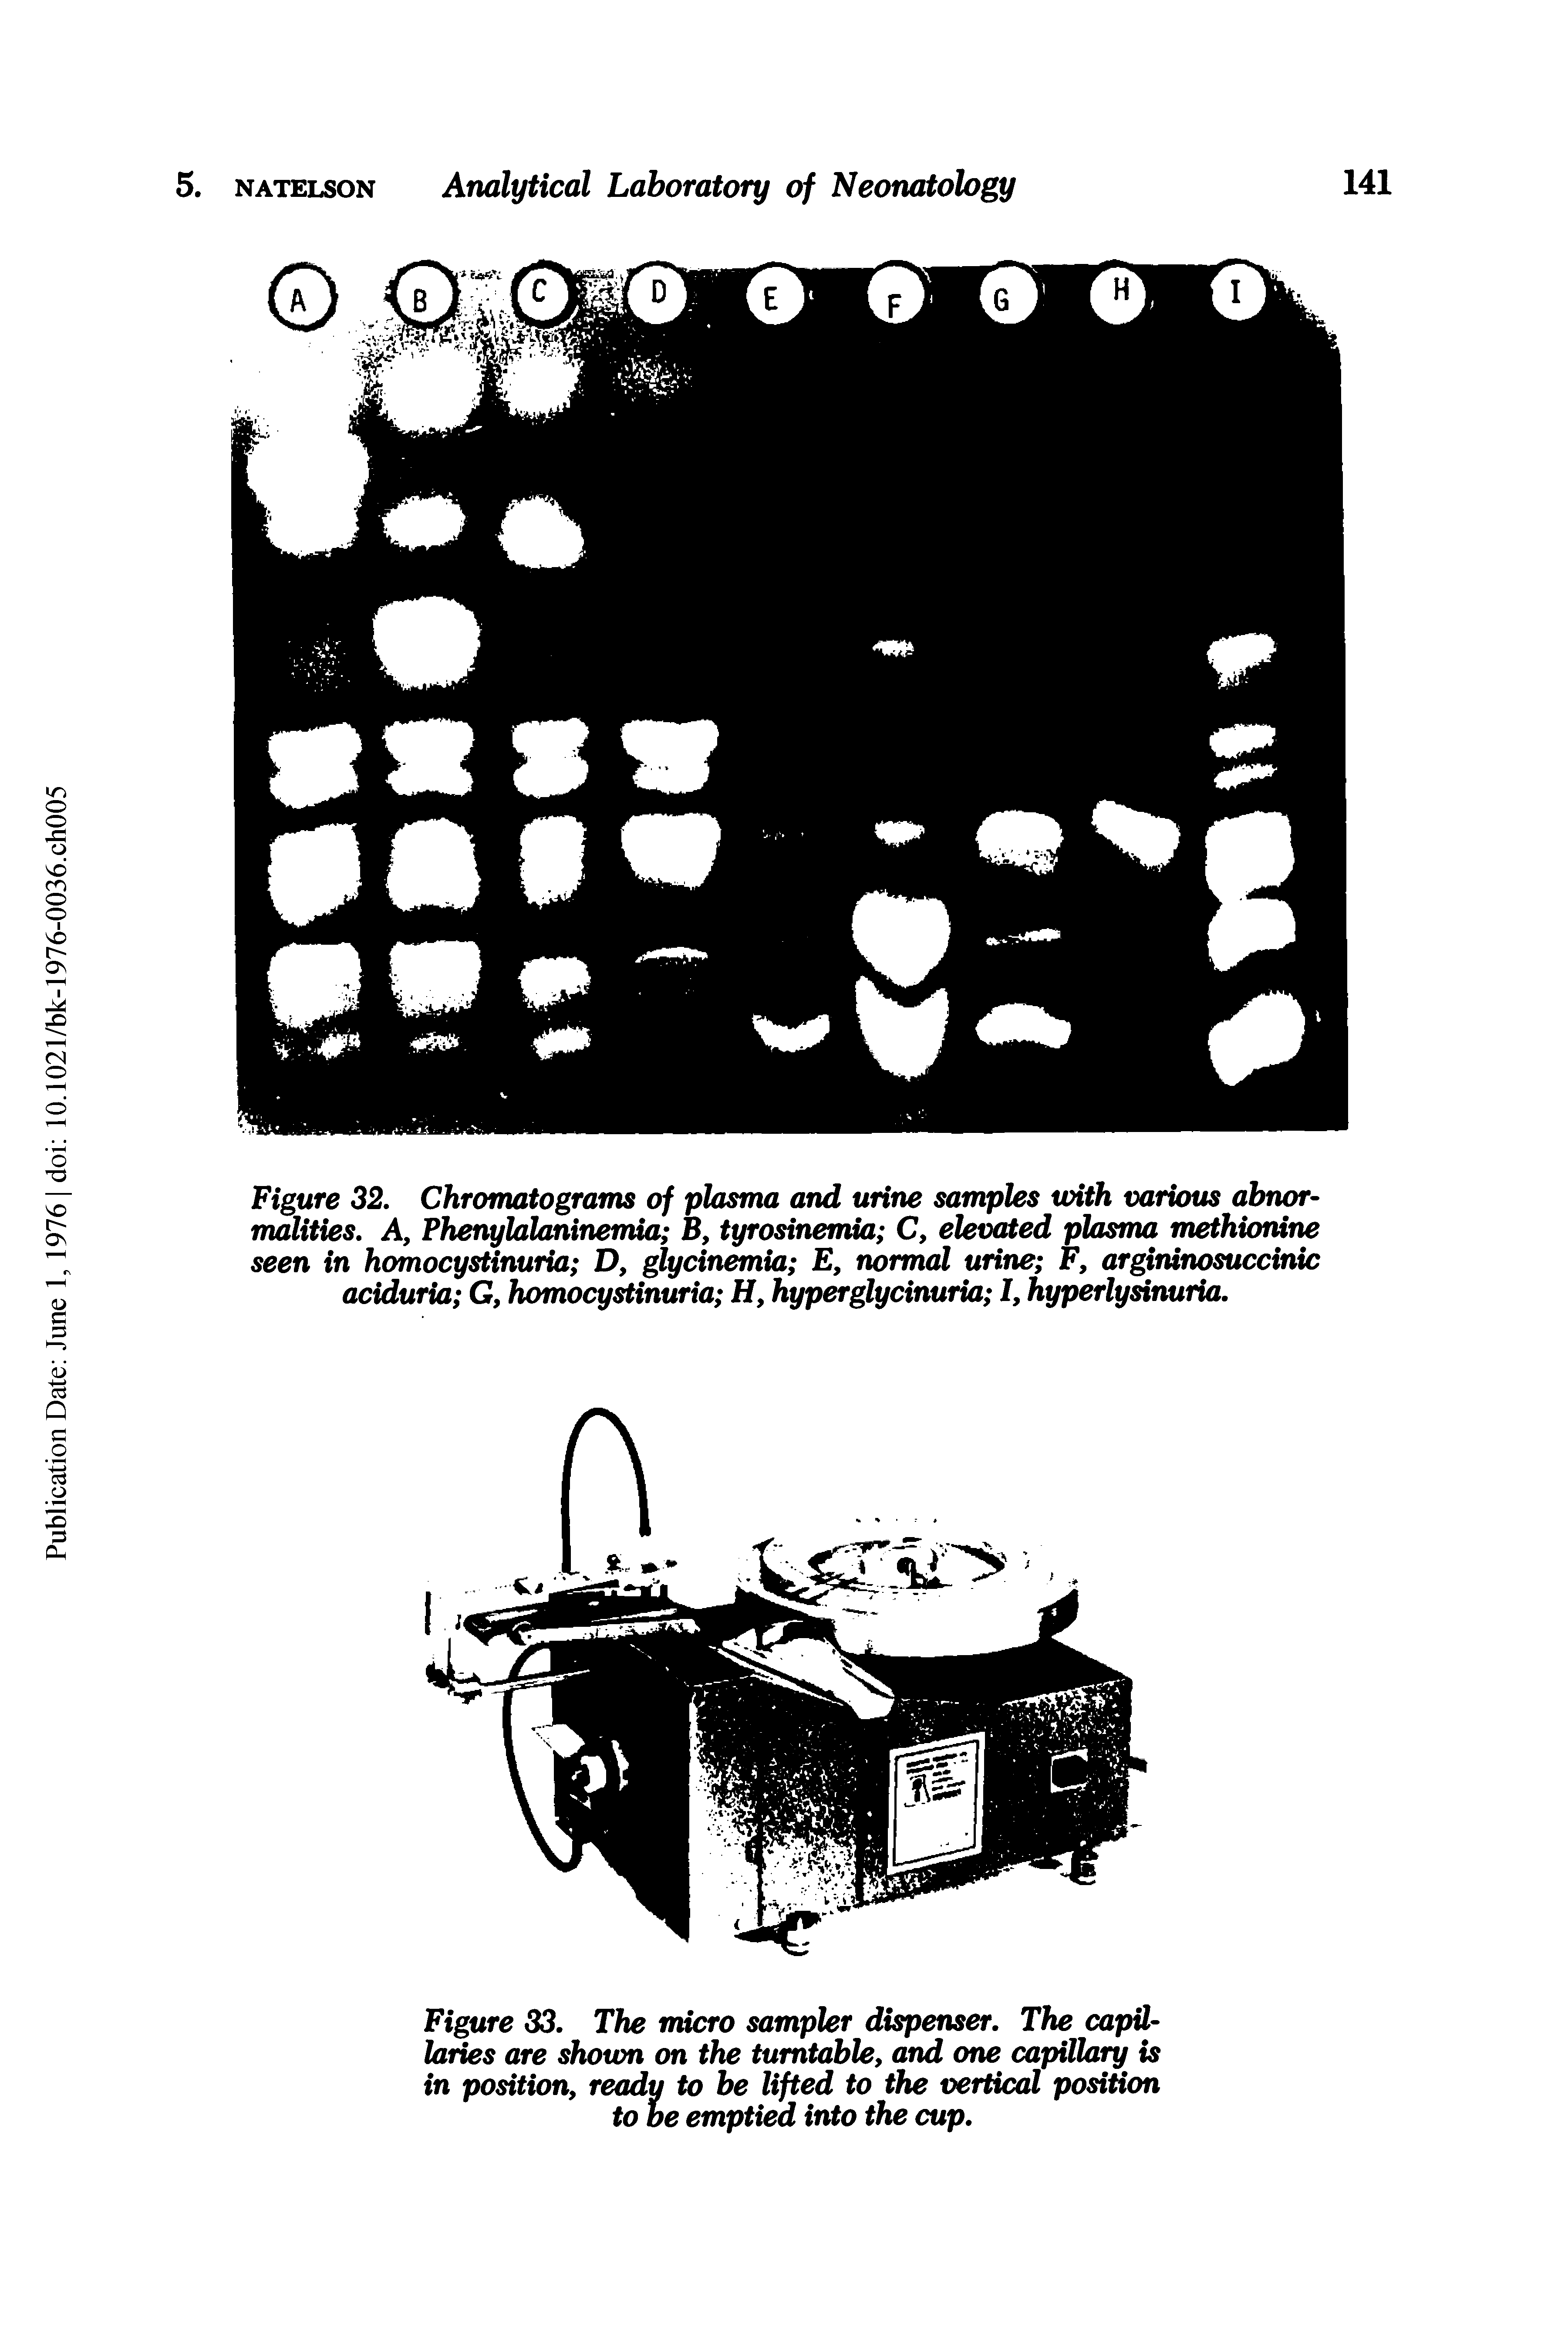 Figure 33. The micro sampler dispenser. The capillaries are shown on the turntable, and one capillary is in position, ready to be lifted to the vertical position to be emptied into the cup.